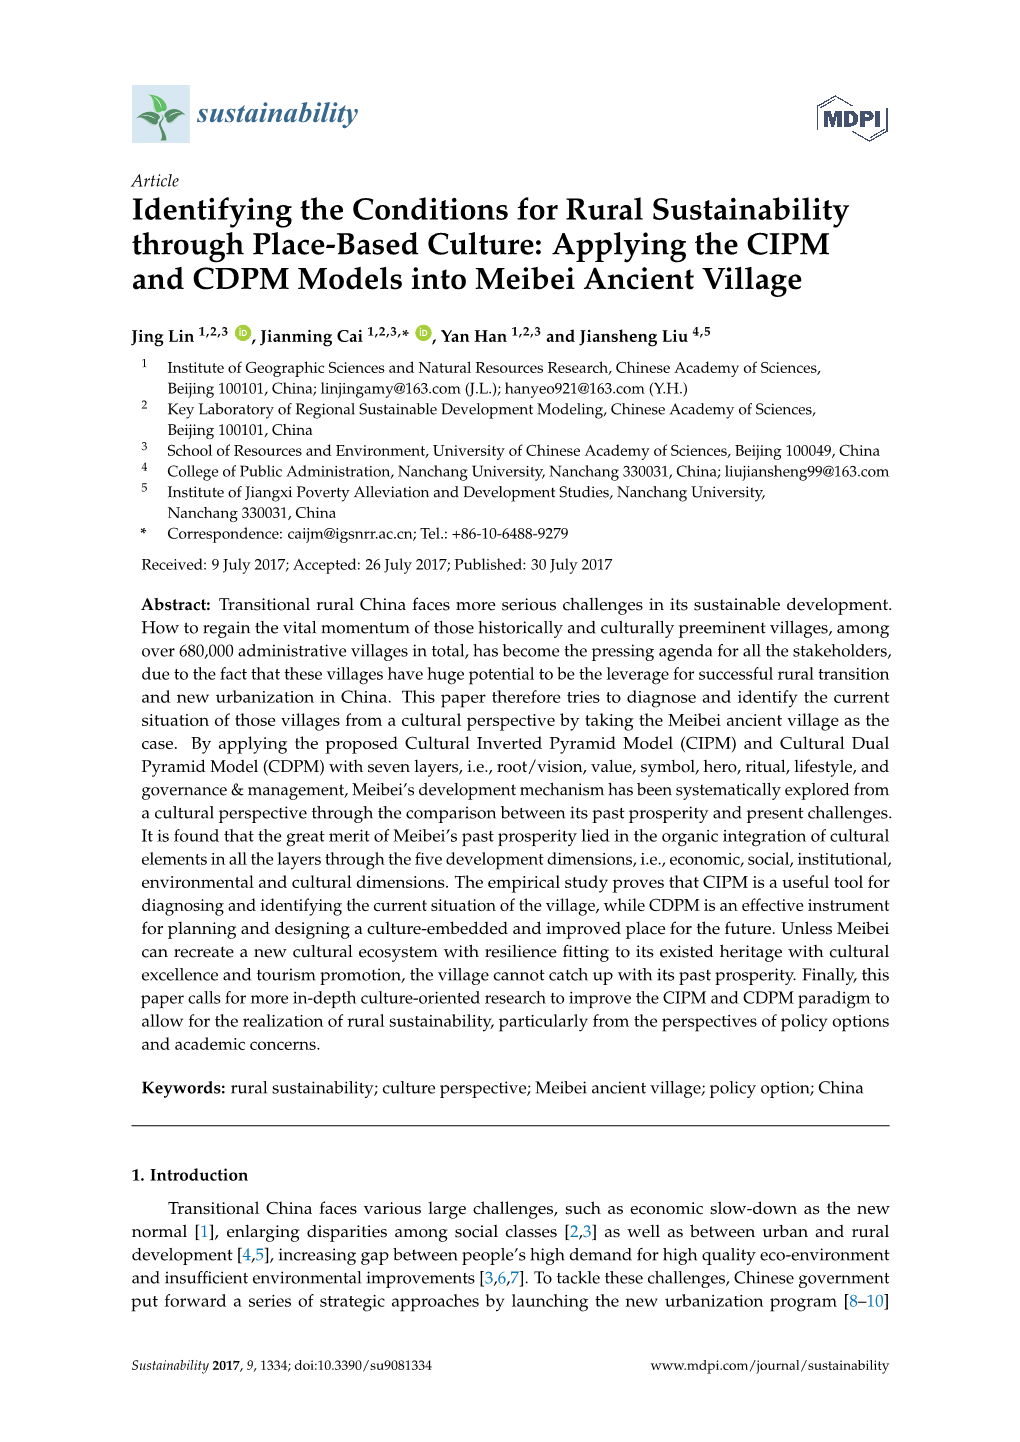 Identifying the Conditions for Rural Sustainability Through Place-Based Culture: Applying the CIPM and CDPM Models Into Meibei Ancient Village